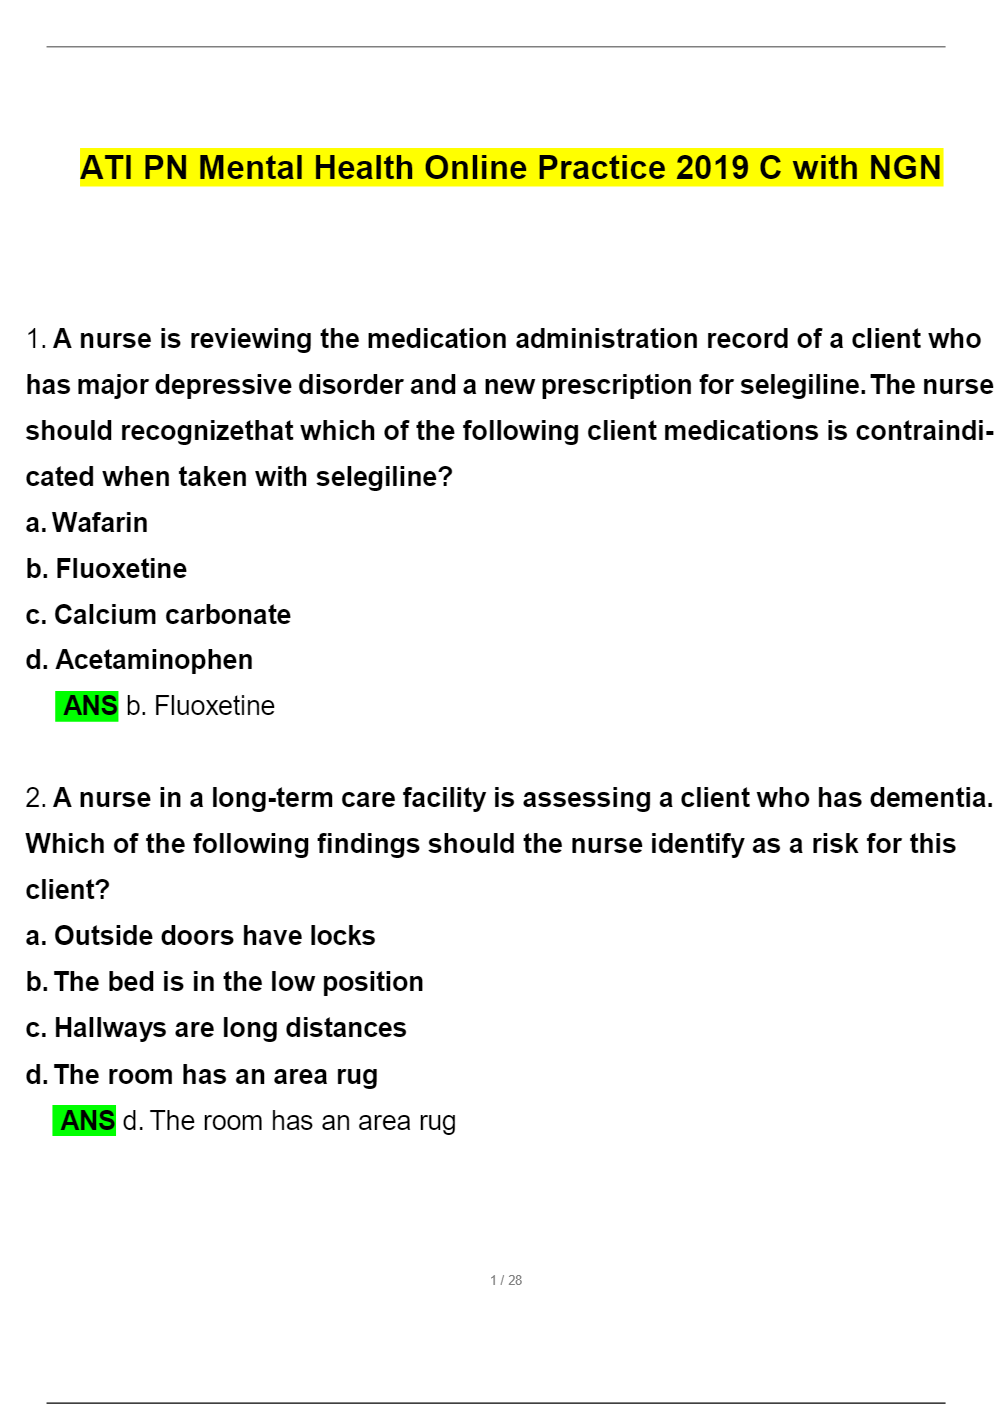 ATI PN Mental Health Online Practice 2019 B with NGN Questions and